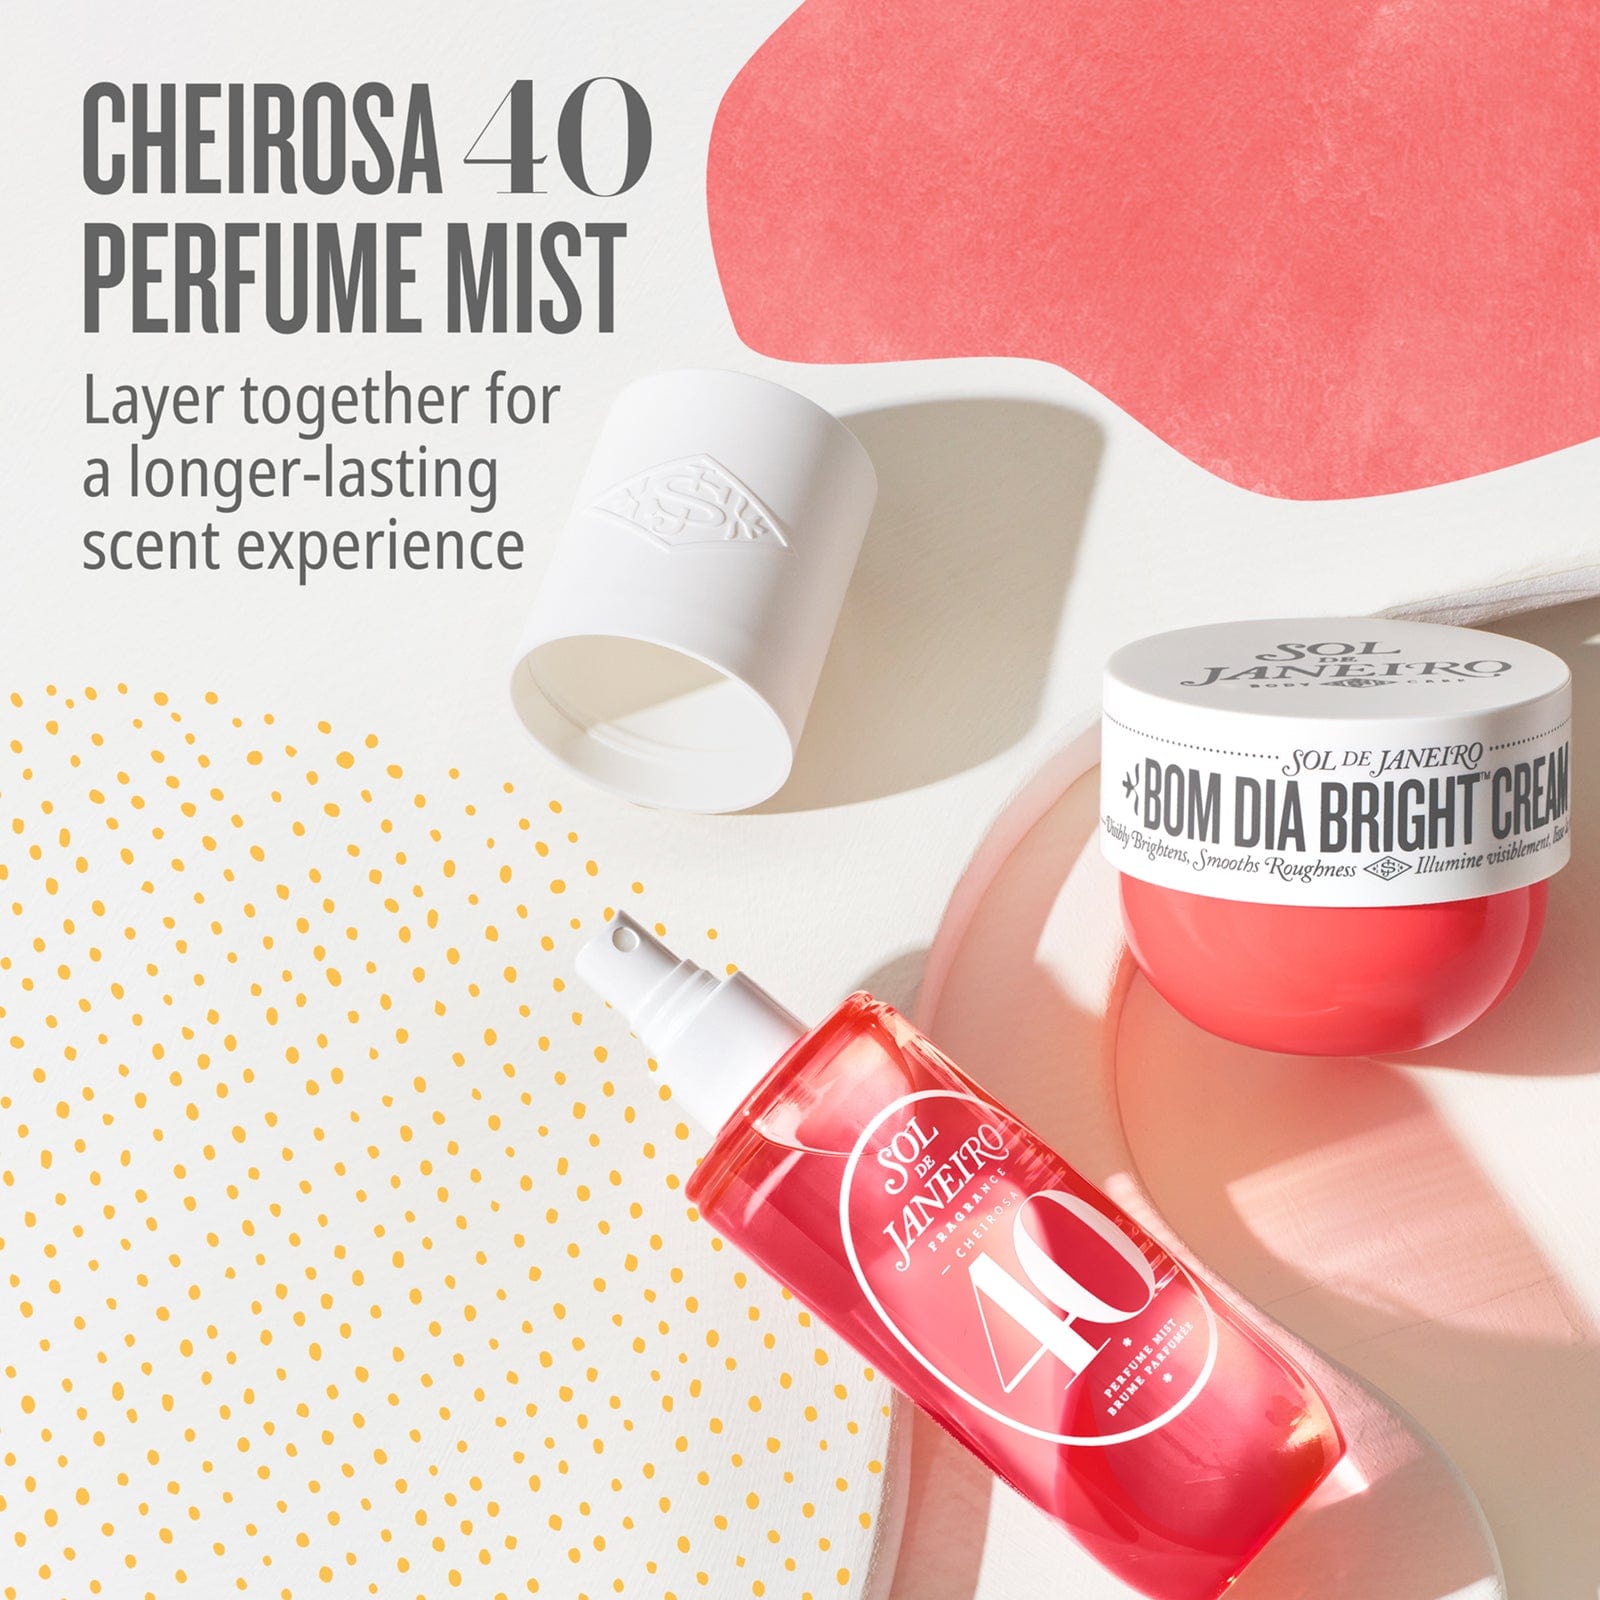 Cheirosa 40 Perfume Mist layer together for a longer-lasting scent experience